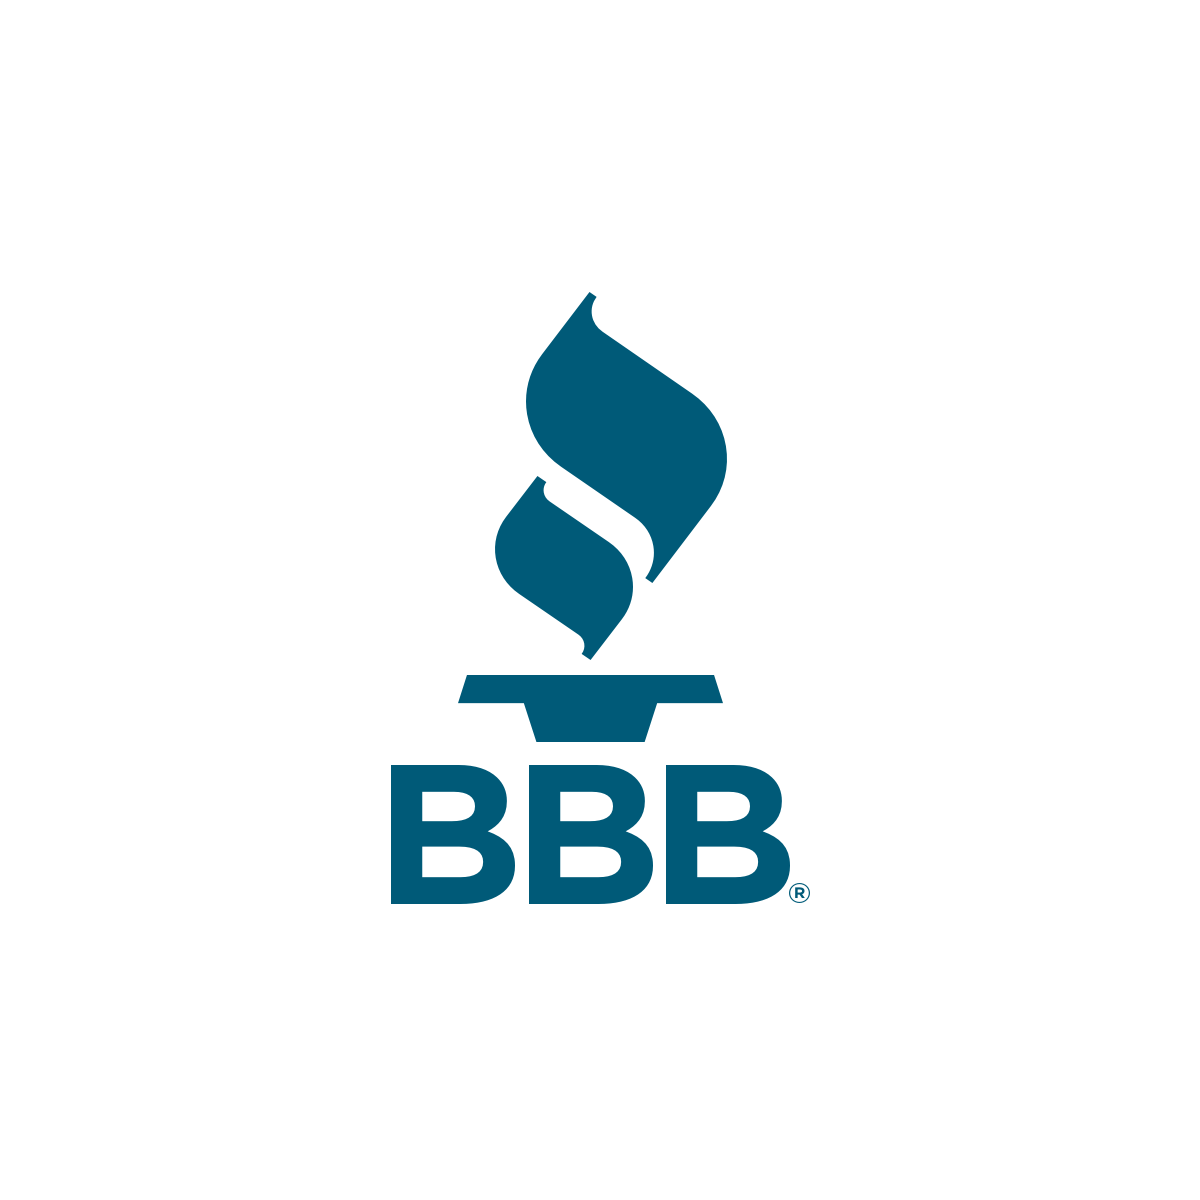 Better Business Bureau of Silicon Valley